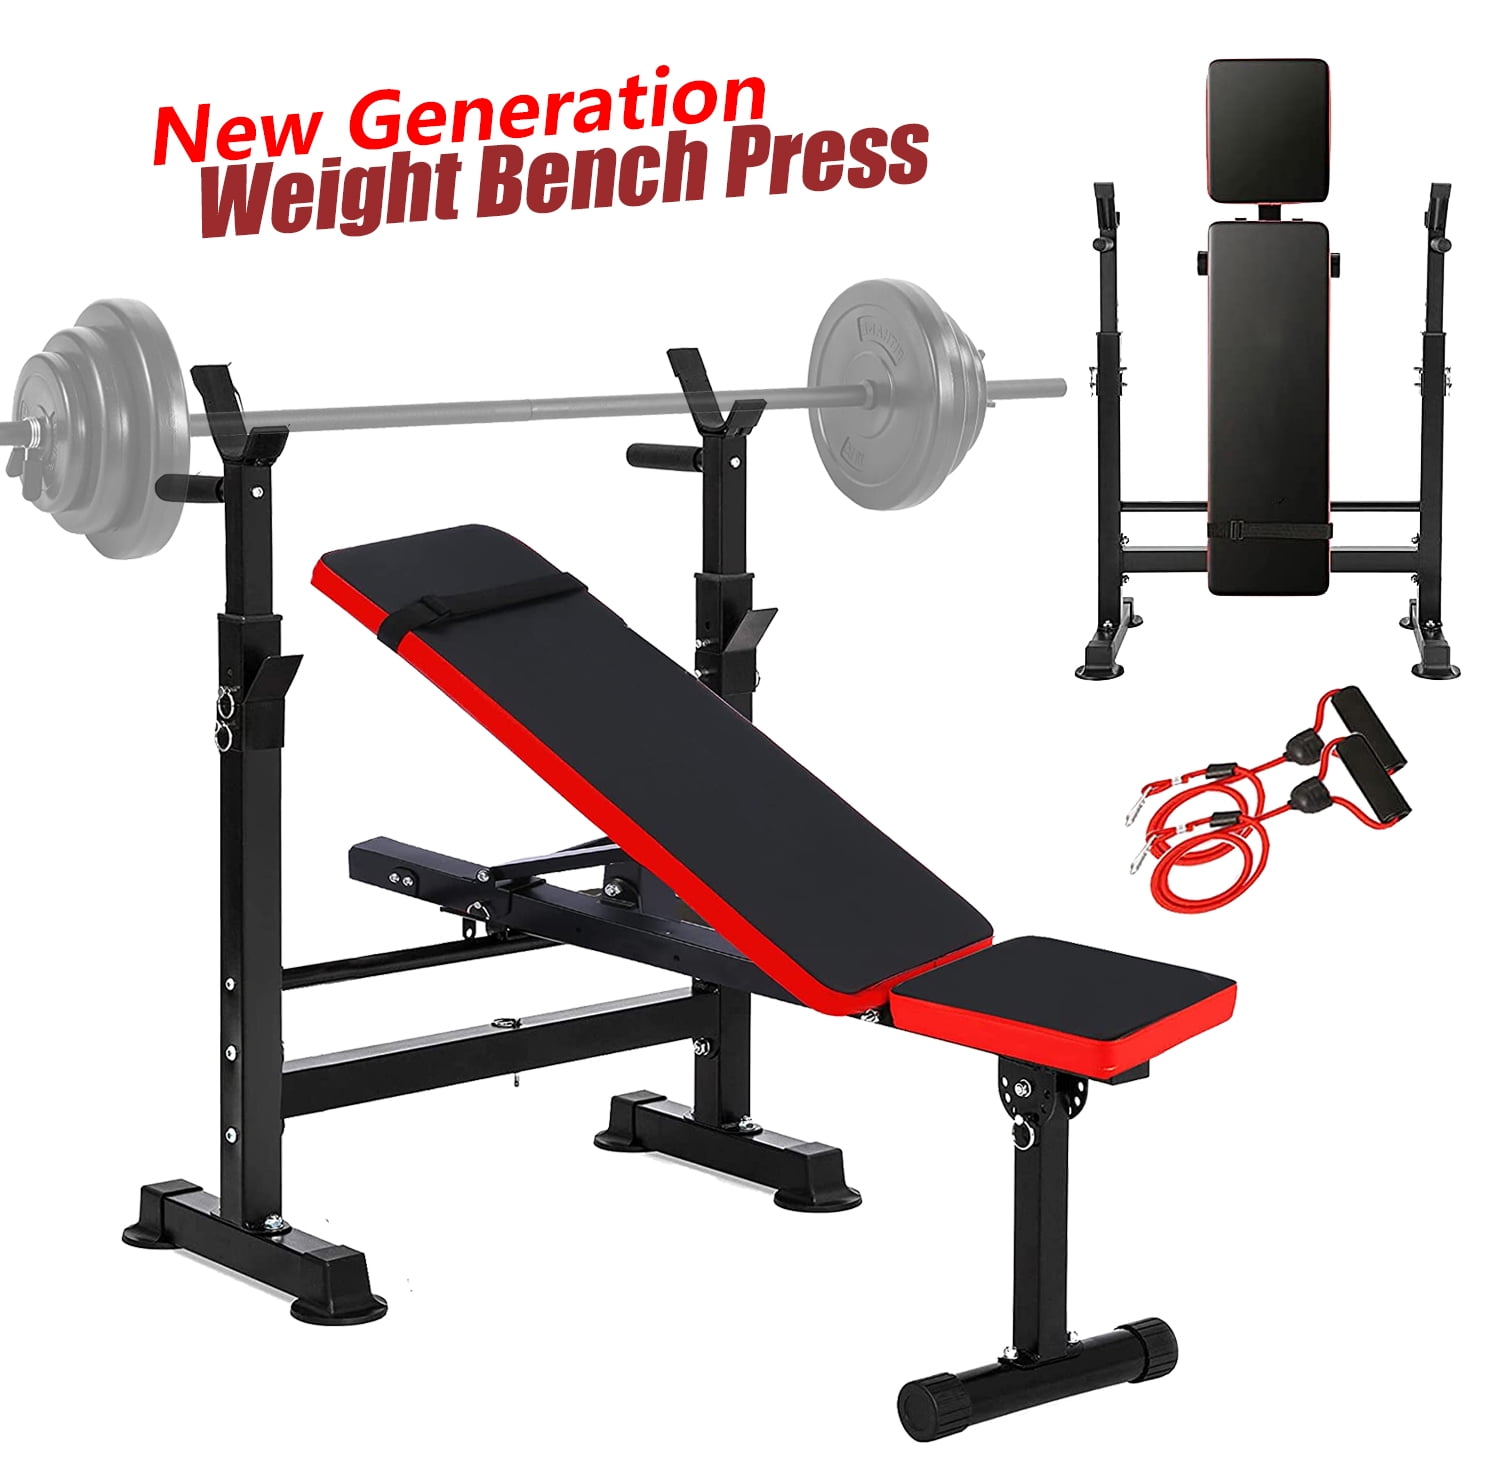 NEW FOLDING WEIGHT BENCH & DIP STATION LIFTING/CHEST PRESS SITUP HOME GYM